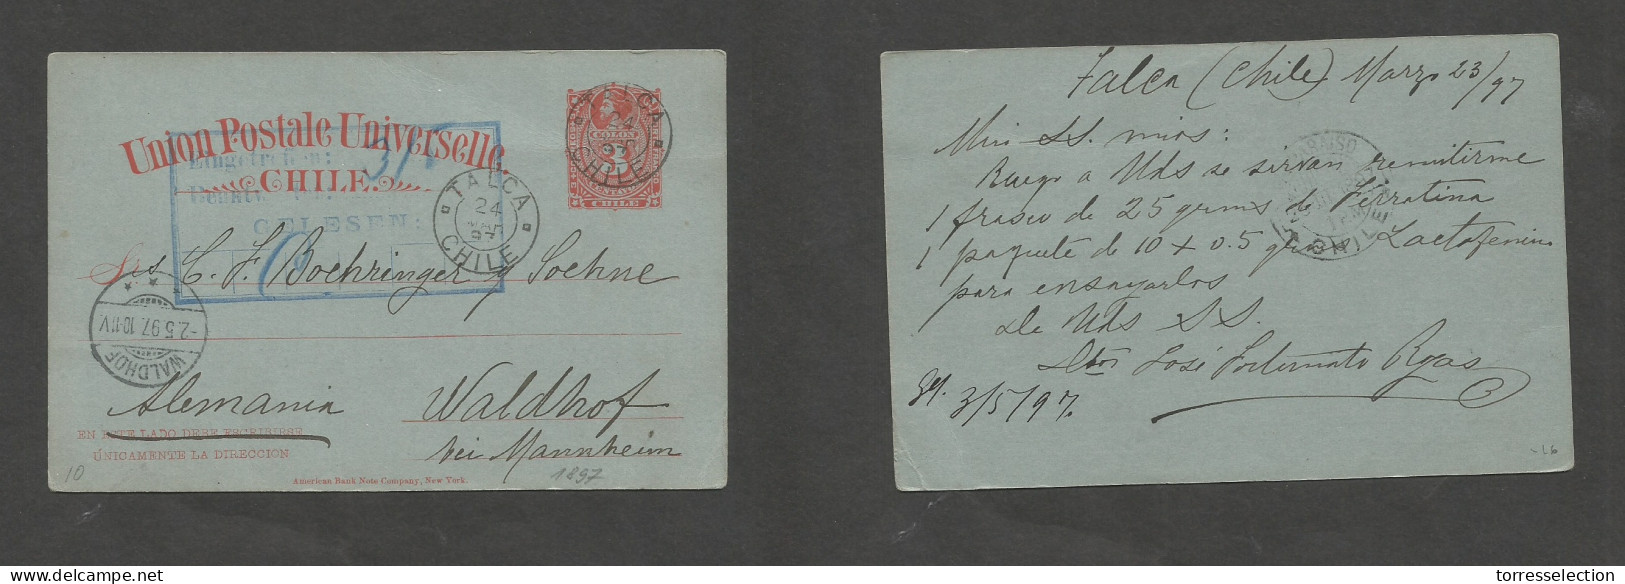 CHILE - Stationery. 1897 (23 March) Talca - Germany, Wald Hof (2 May) 3c Red, Bluish Stat Card. Fine Used. SALE. - Chili